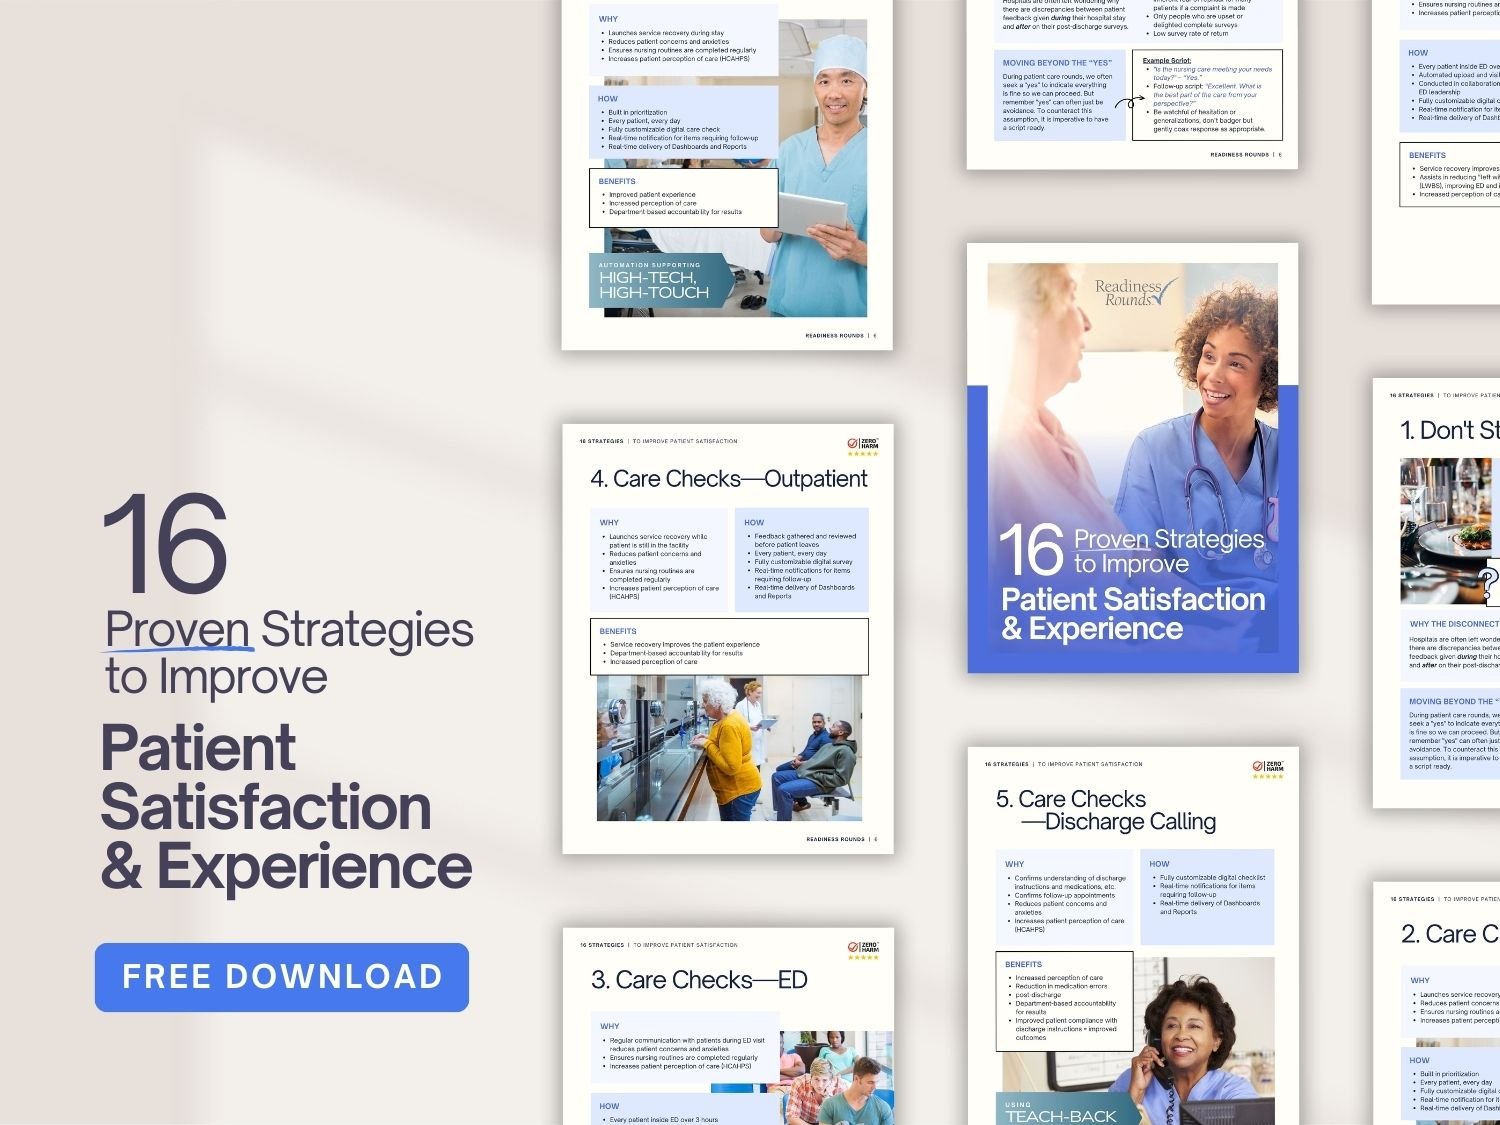 The 16 Proven Strategies to Improve Patient Satisfaction & Experience eBook